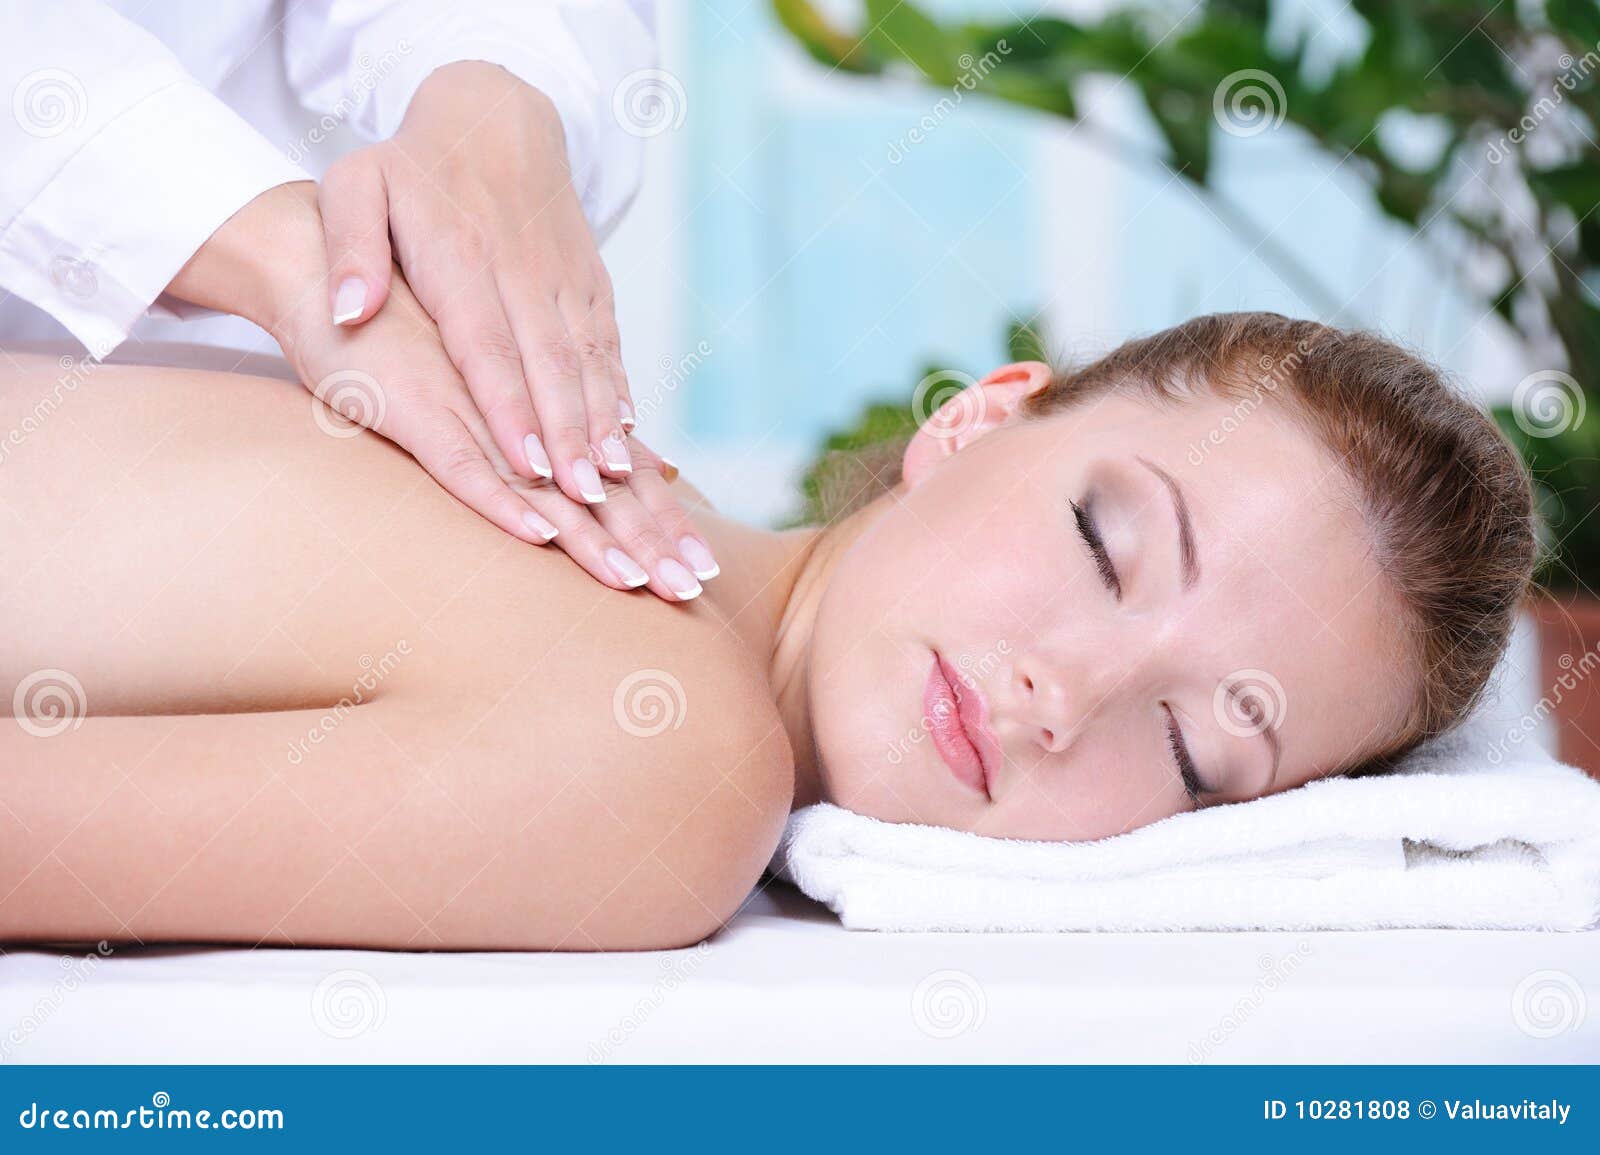 Woman Getting Back Massage and Relaxation Stock Photo - Image of